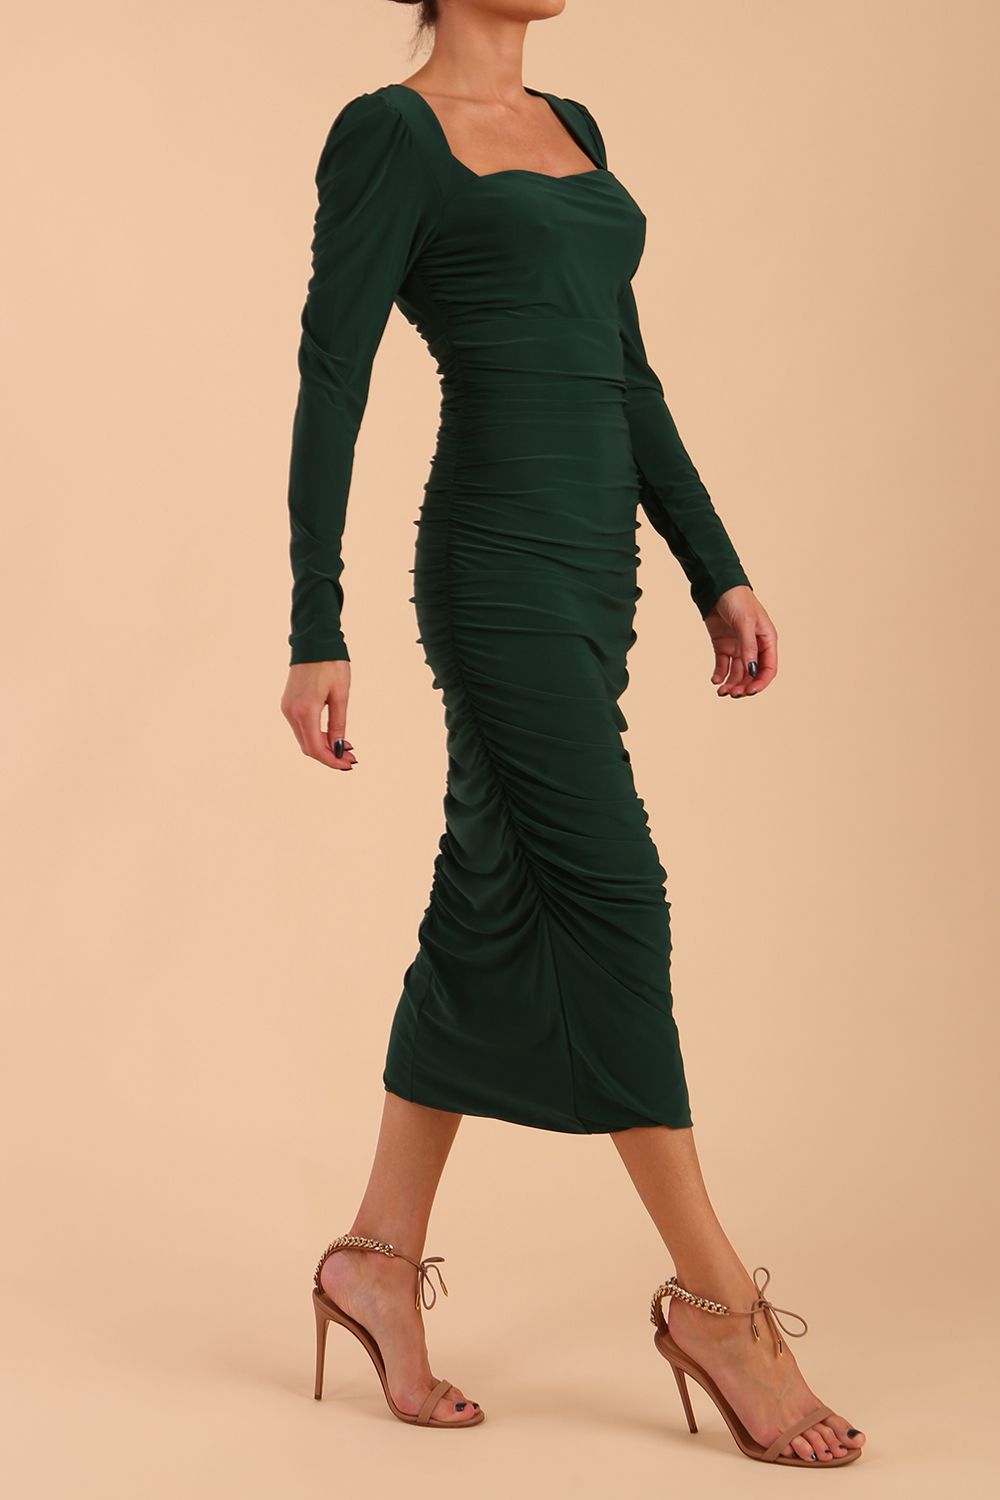 Model wearing diva catwalk Kiki Silky Stretch Ruched Midaxi Dress in Forest Green side